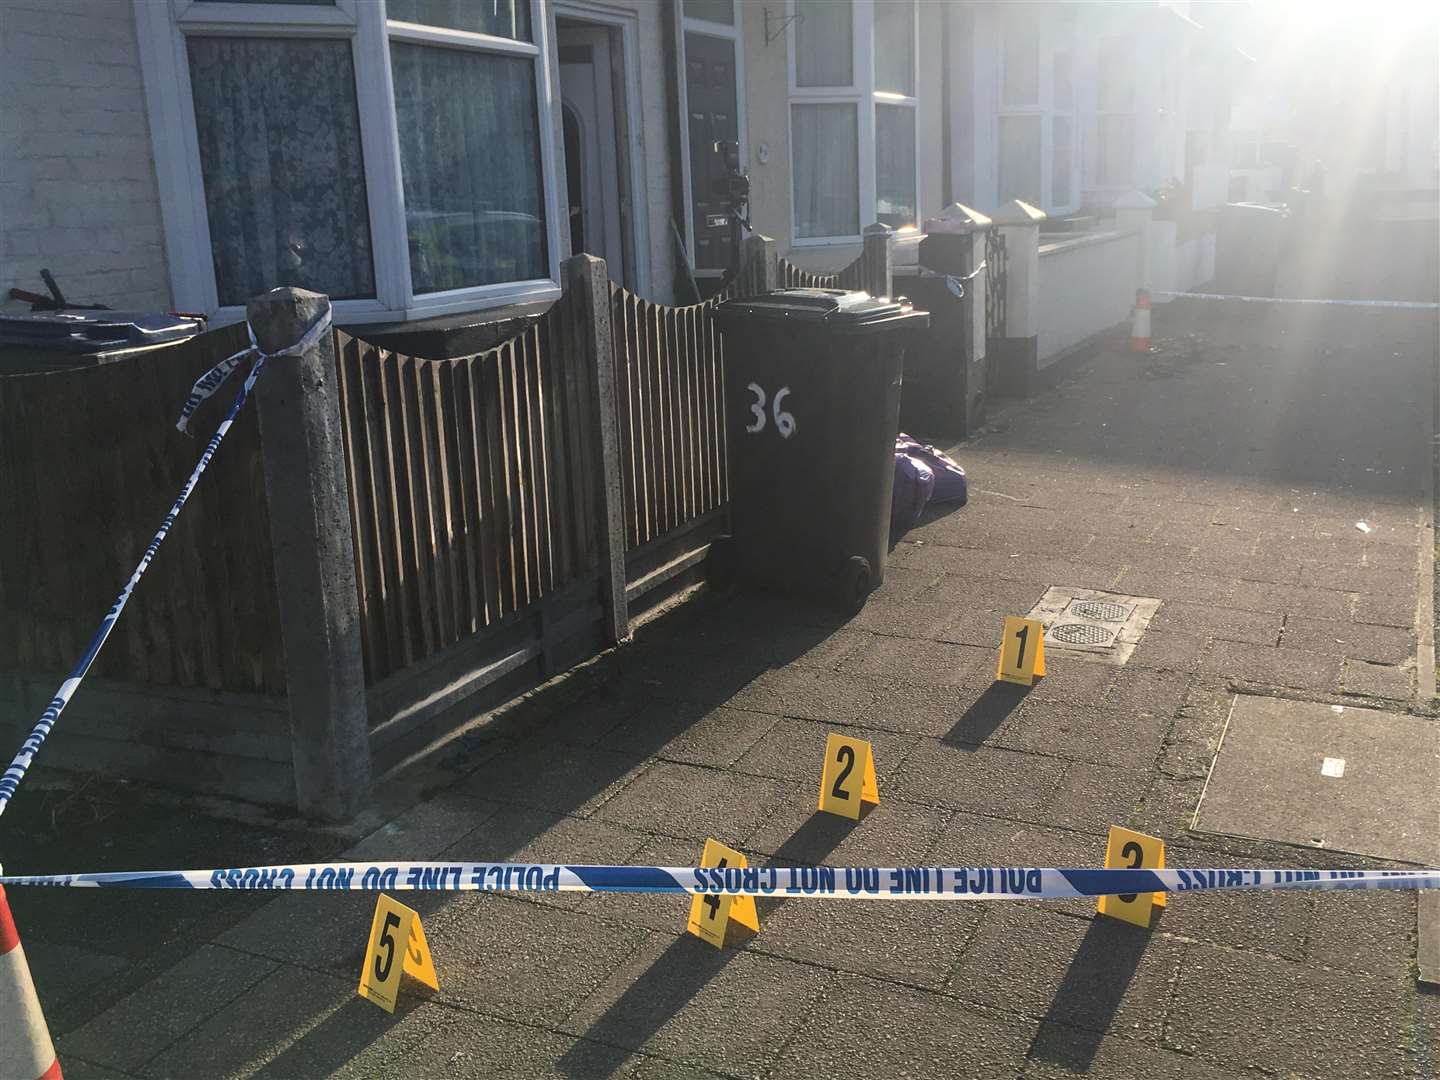 Police have taped off a home in Brunswick Square